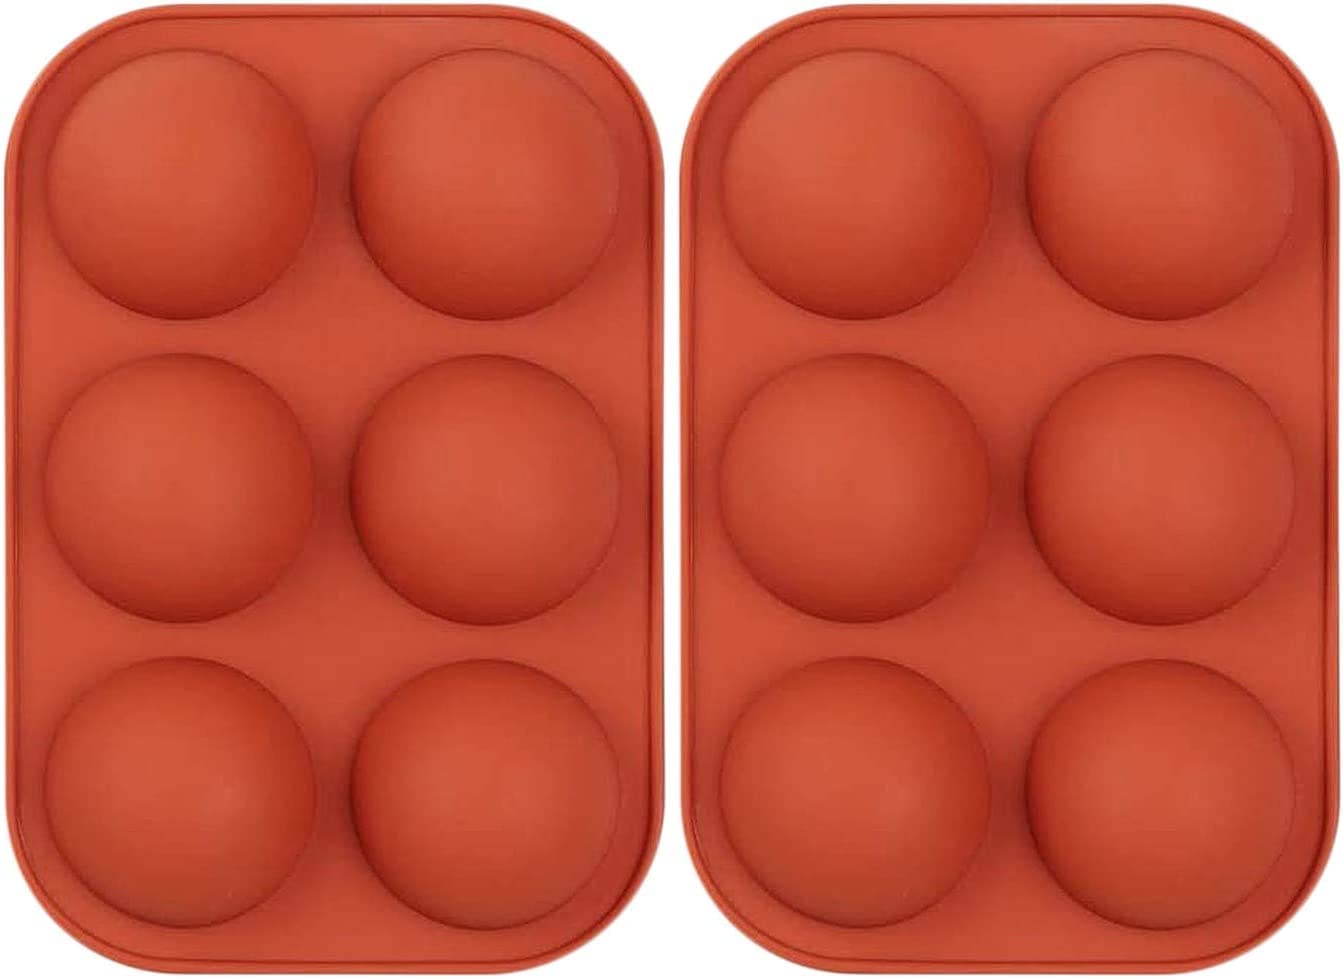 6 Holes Silicone Mold for Chocolate Bomb, 2 Pack Semi Sphere Baking Molds For Making Cake, Jelly, Mousse, Pudding, Handmade Soap, BPA Free Baking Mould